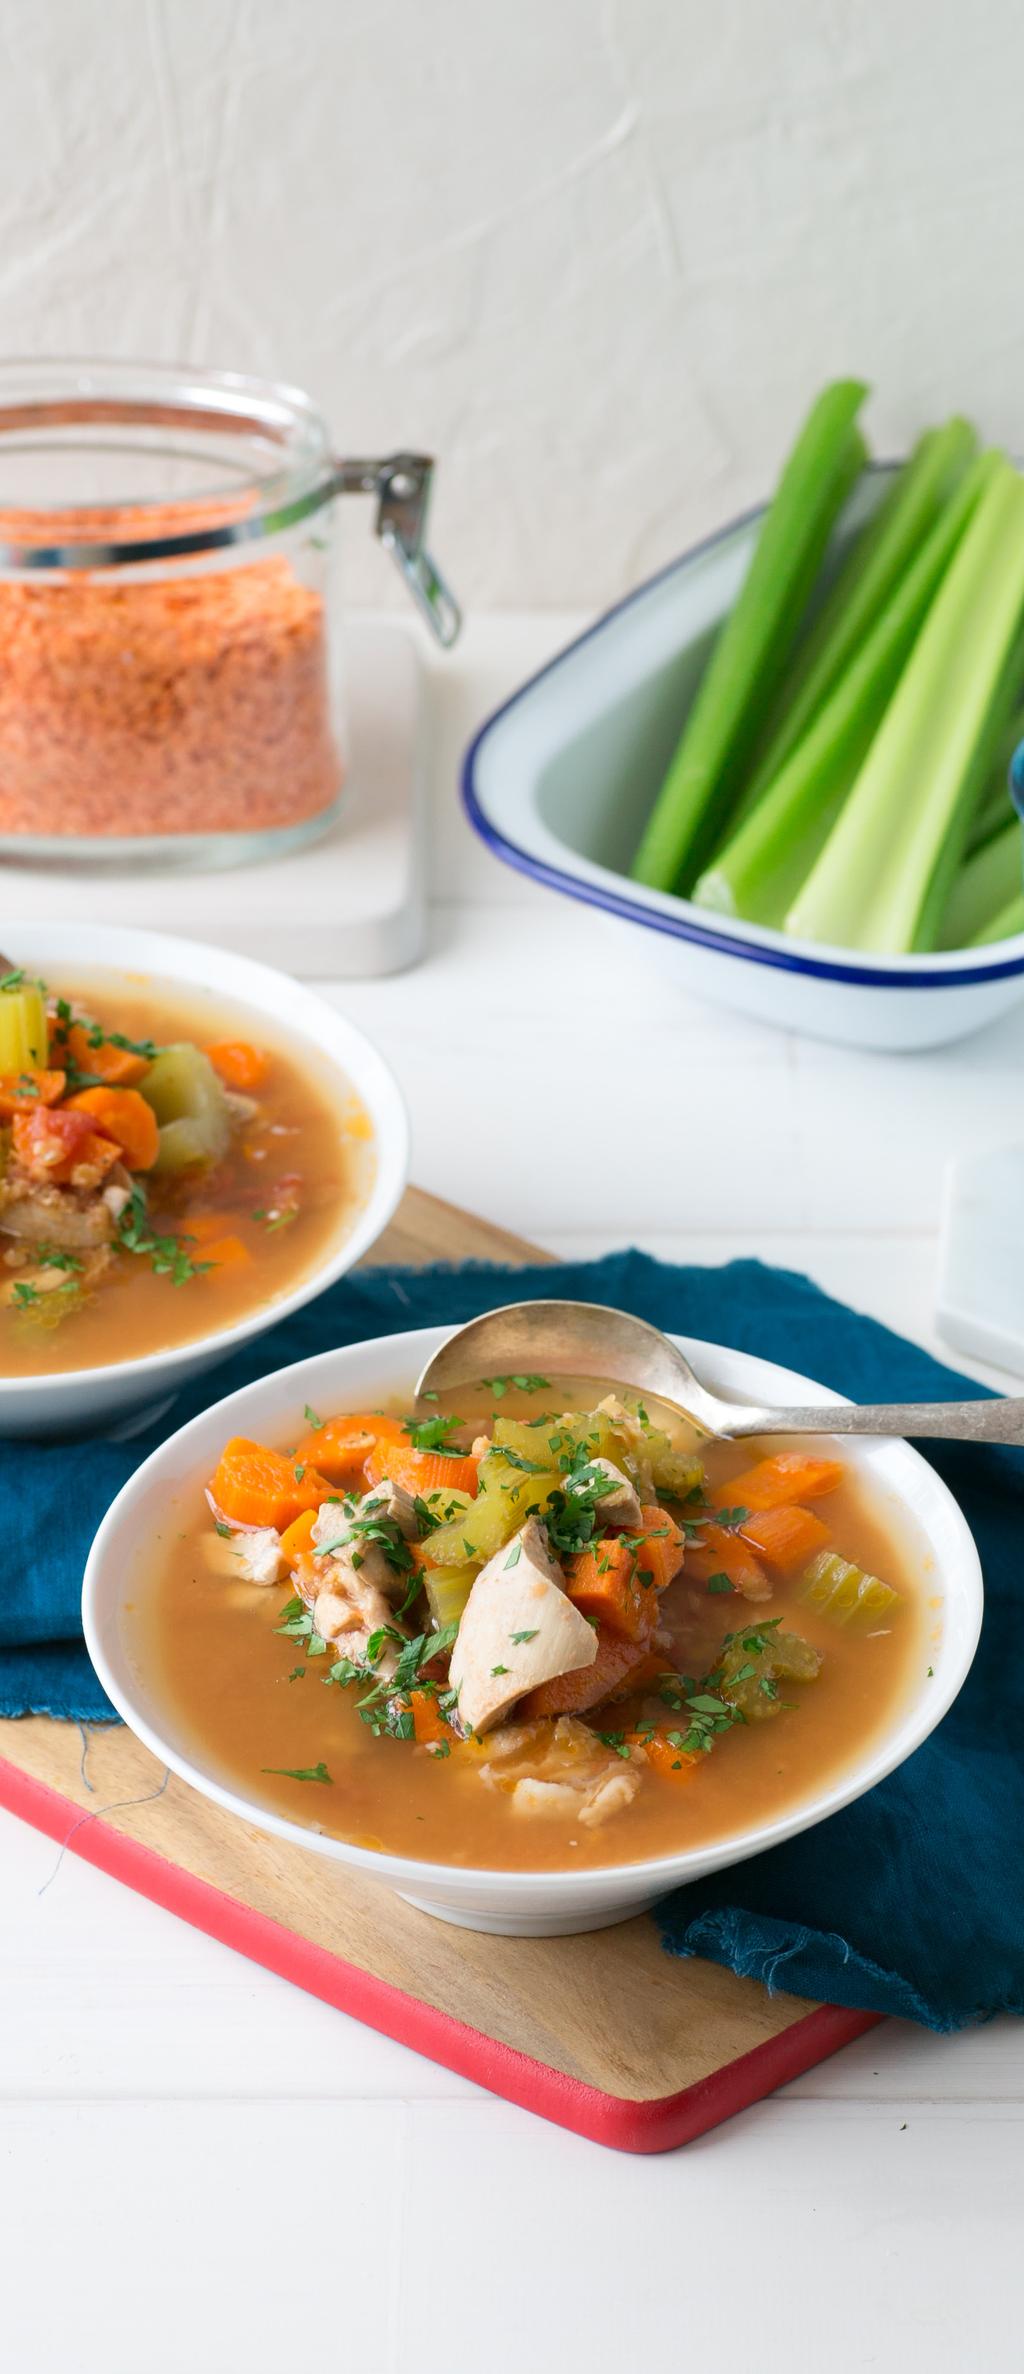 CURRIED CHICKEN & LENTIL SOUP Prep Time: 10 mins Cooking Time: 60 mins Soups are perfect slow cooking recipes. This delicious and hearty recipe can be made in a slow cooker or on the stove.